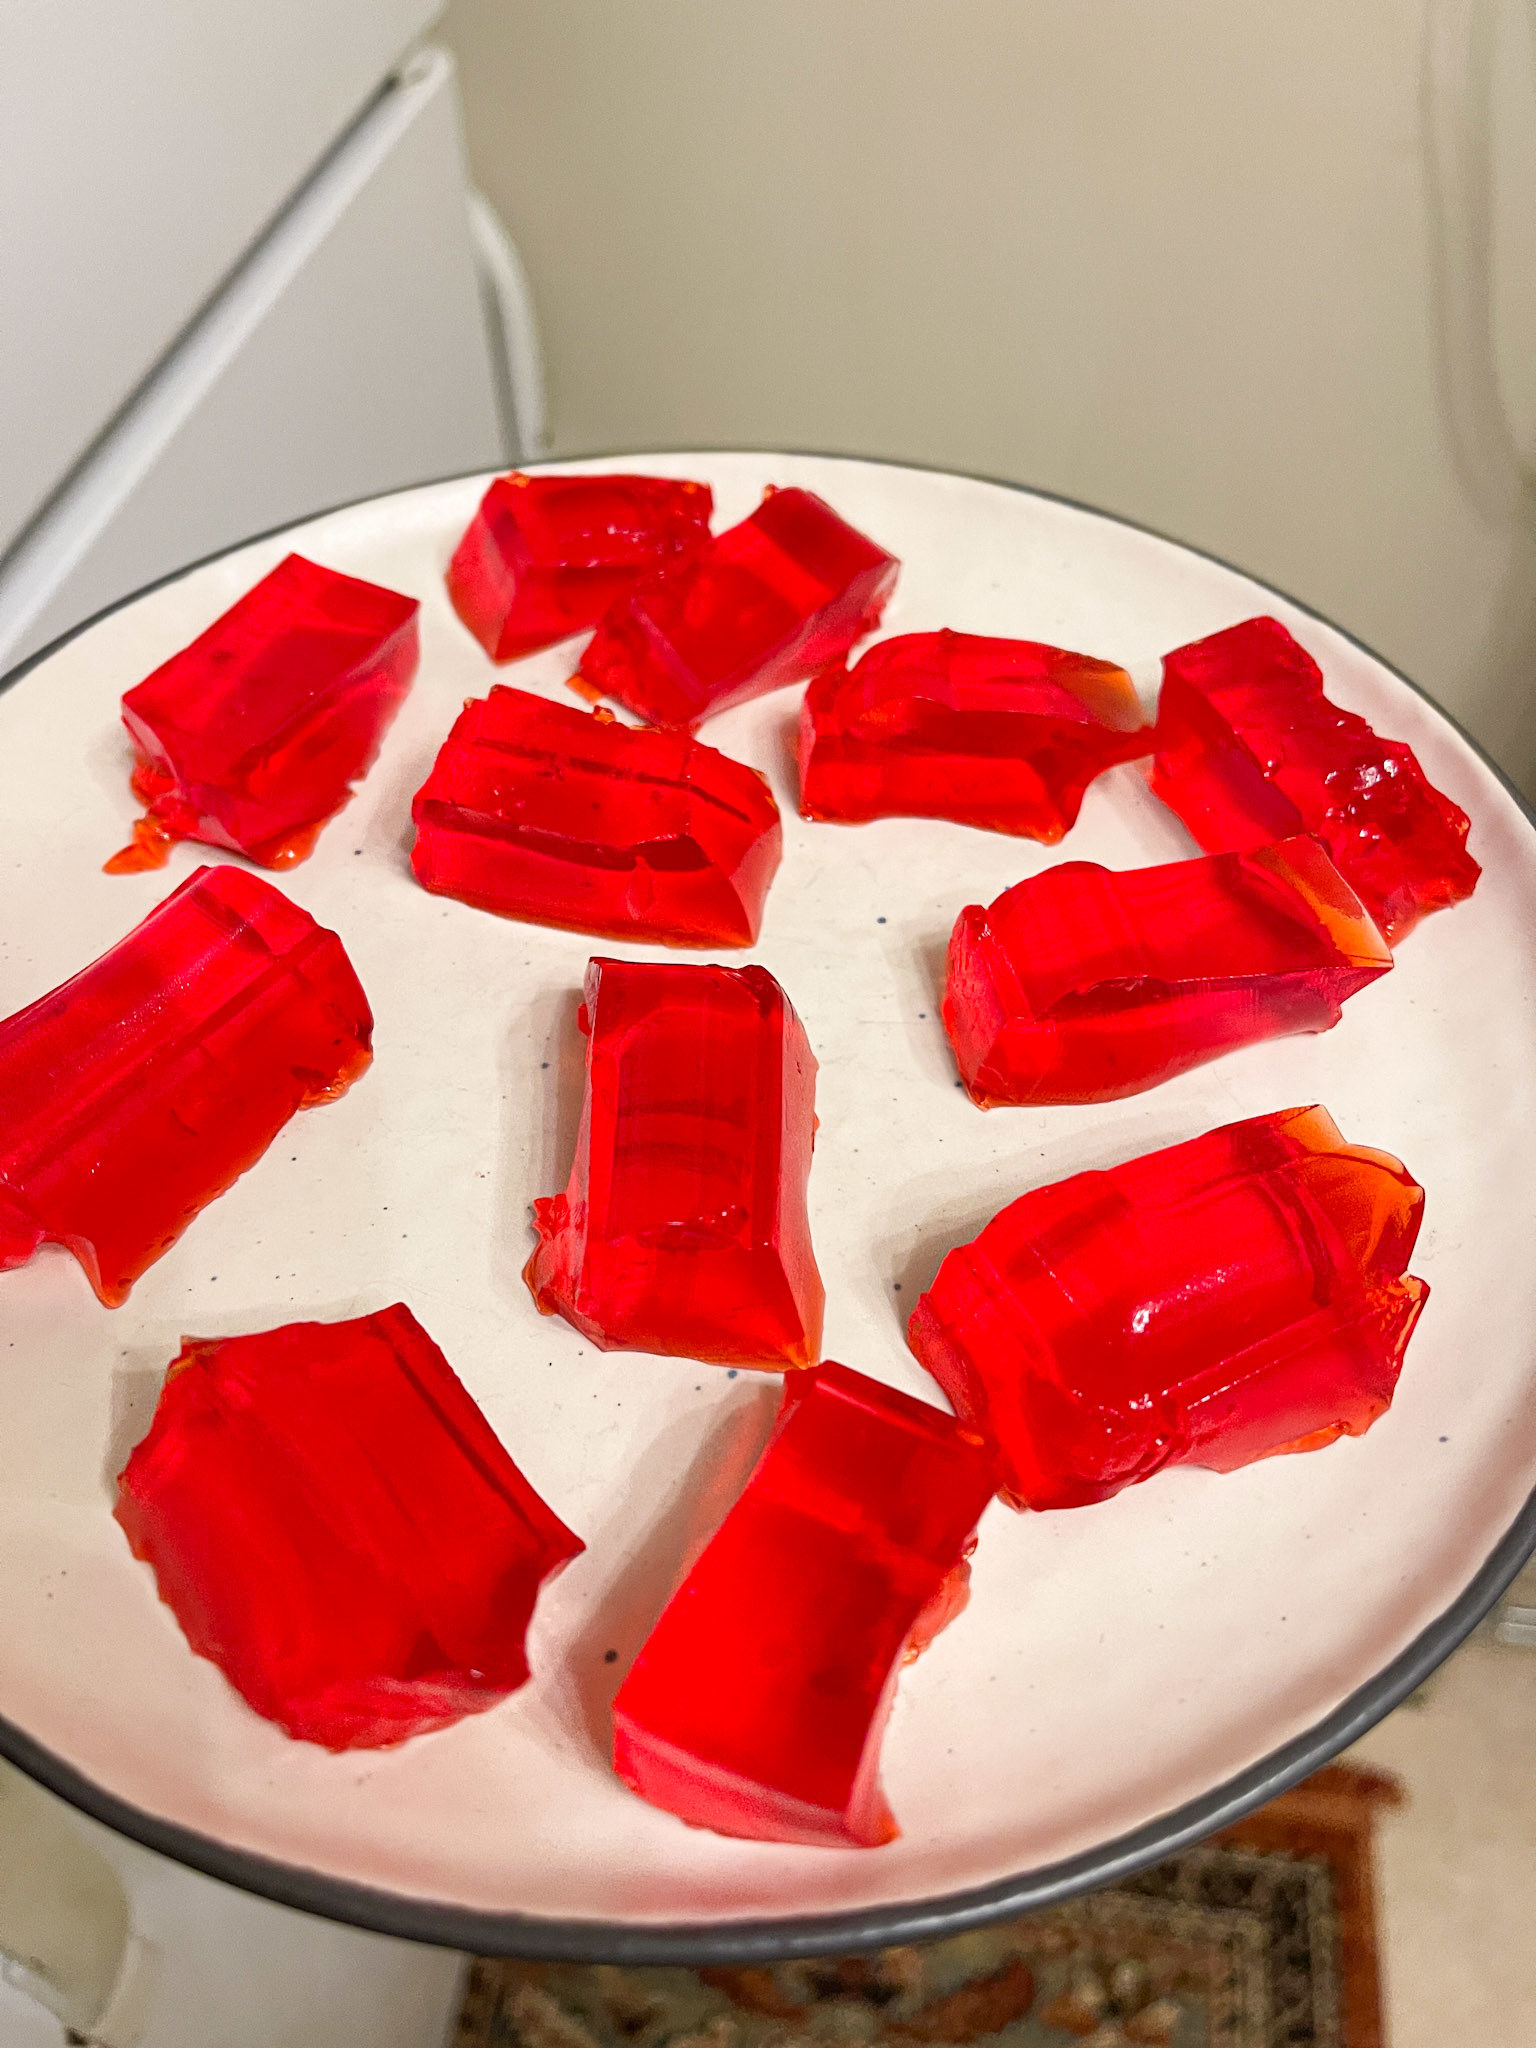 rectangles of red jello on a plate